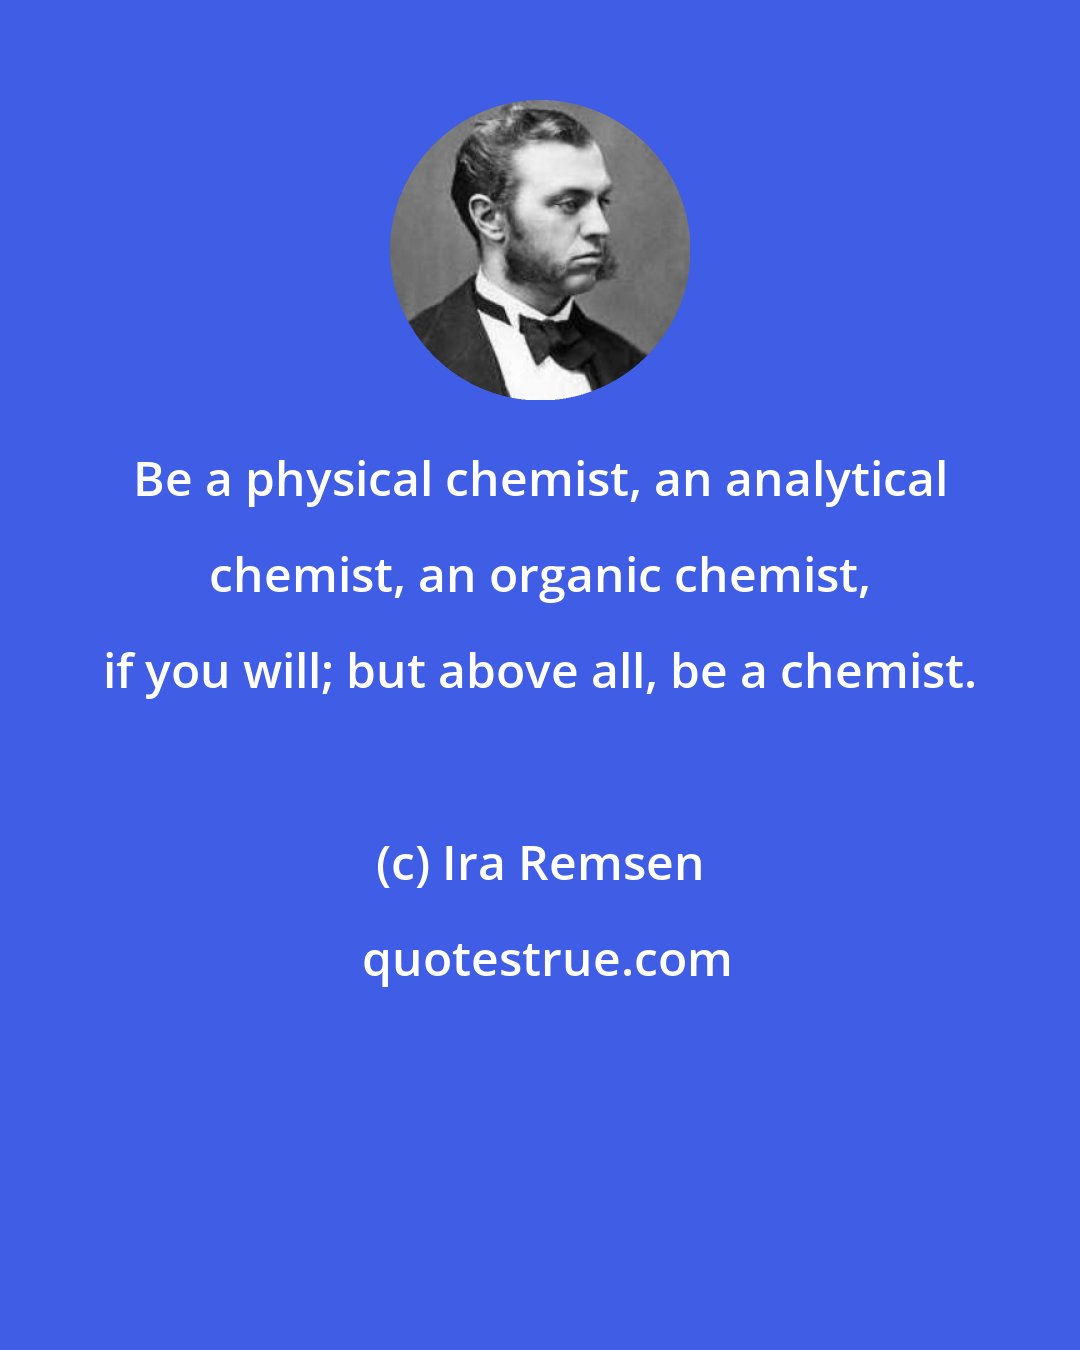 Ira Remsen: Be a physical chemist, an analytical chemist, an organic chemist, if you will; but above all, be a chemist.